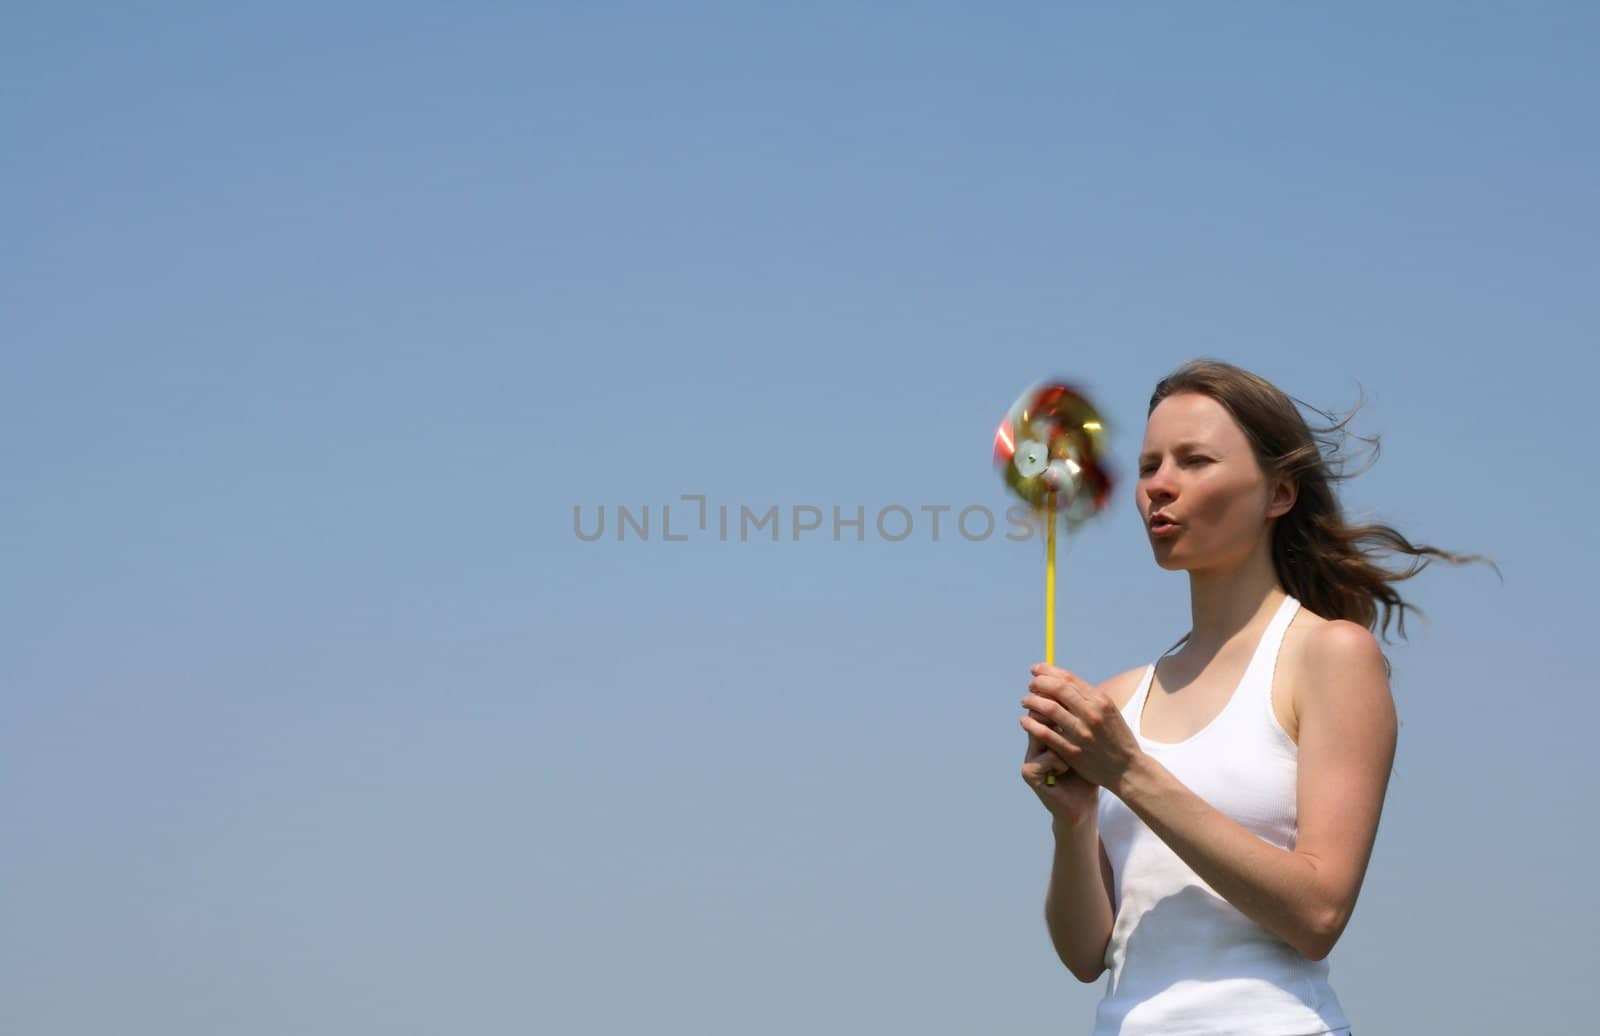 Young woman blowing a colorful pinwheel. Summertime.